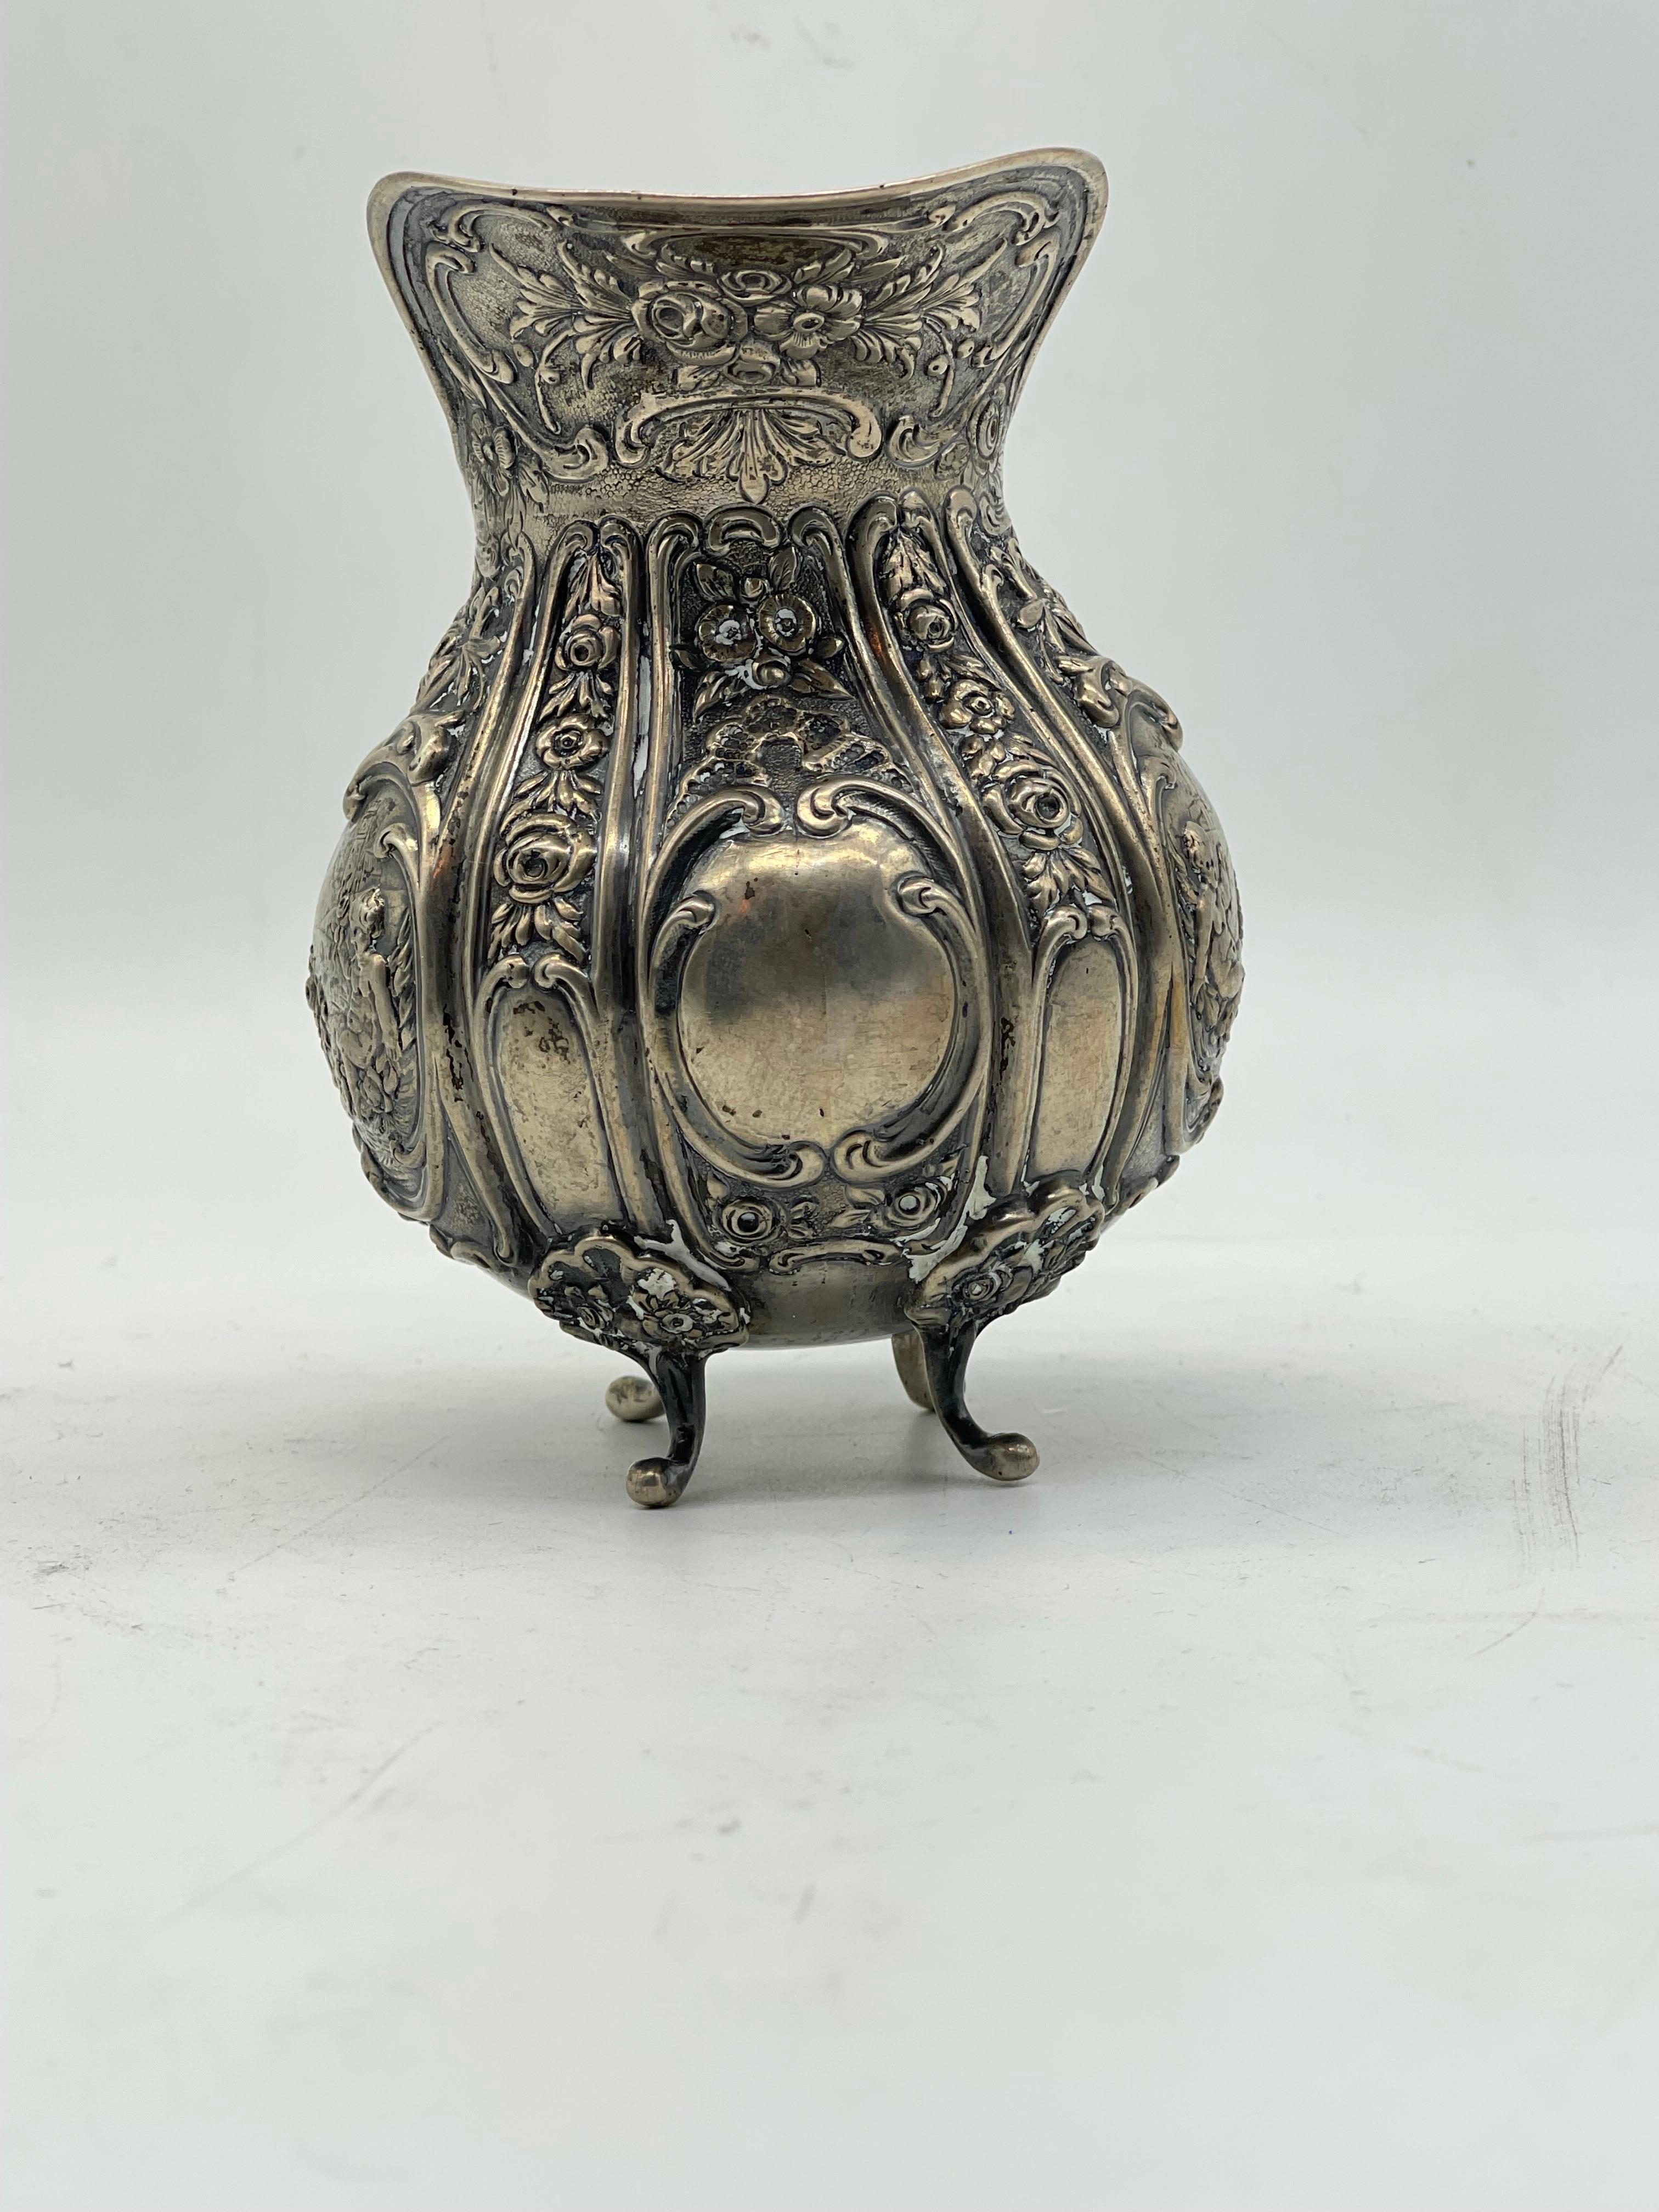 High-Quality beautiful Silver Milk Jug

Flowers & Children ornament
stand on 4 feet

800 Silver - probably from Germany

Weight: 302 grams

The condition can be seen in the pictures.